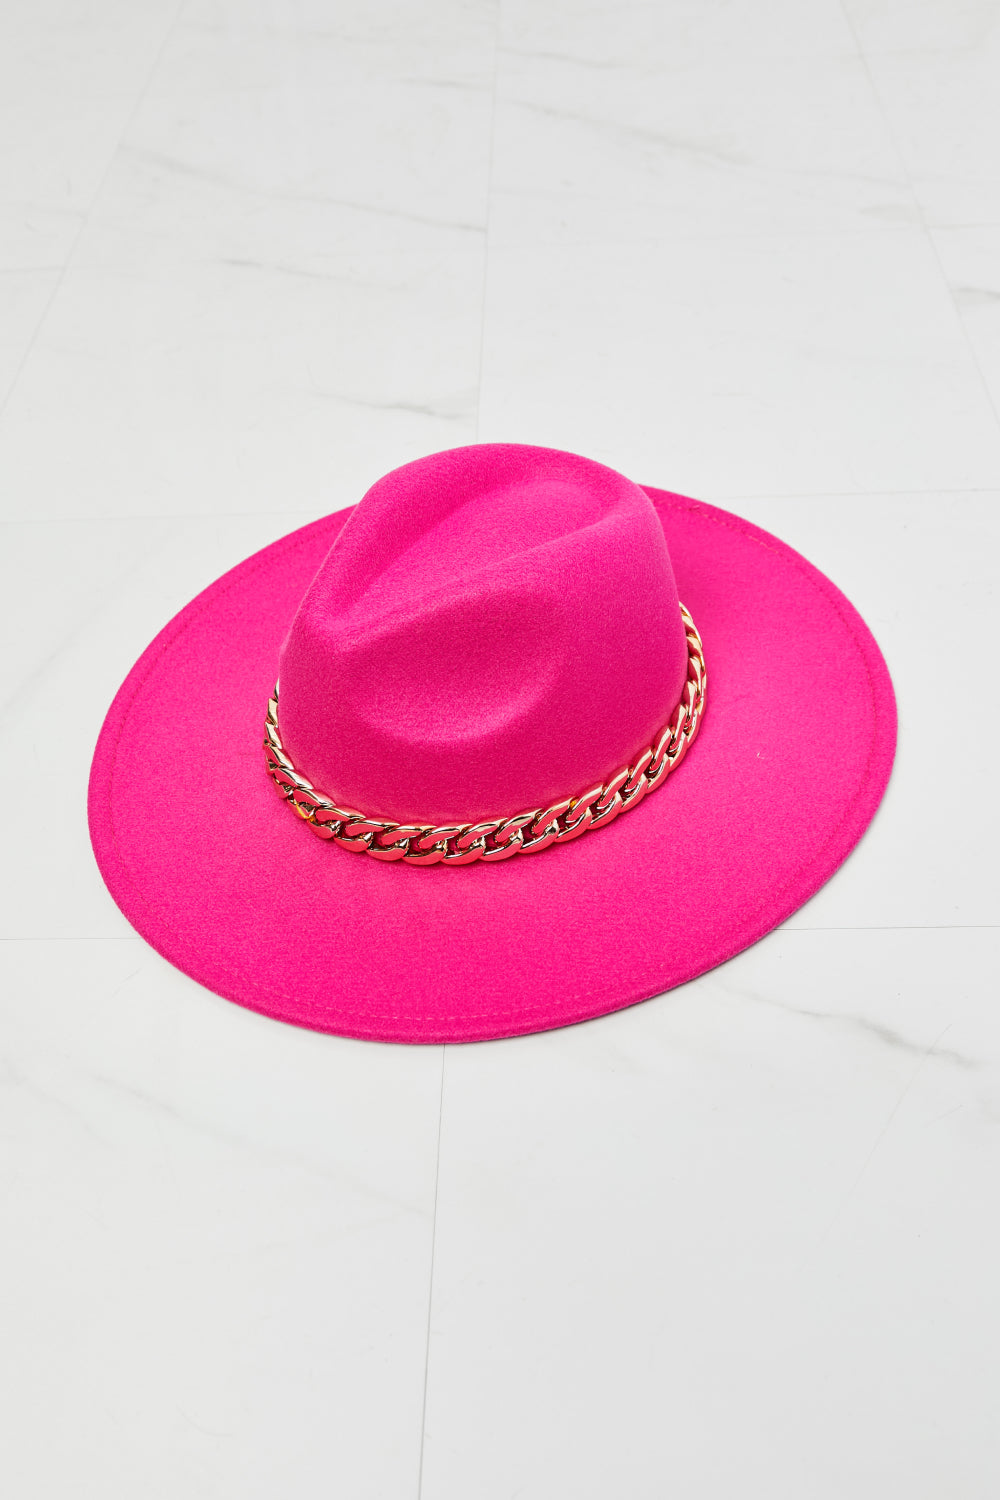 Fame Keep Your Promise Fedora Hat in Pink  Sunset and Swim   